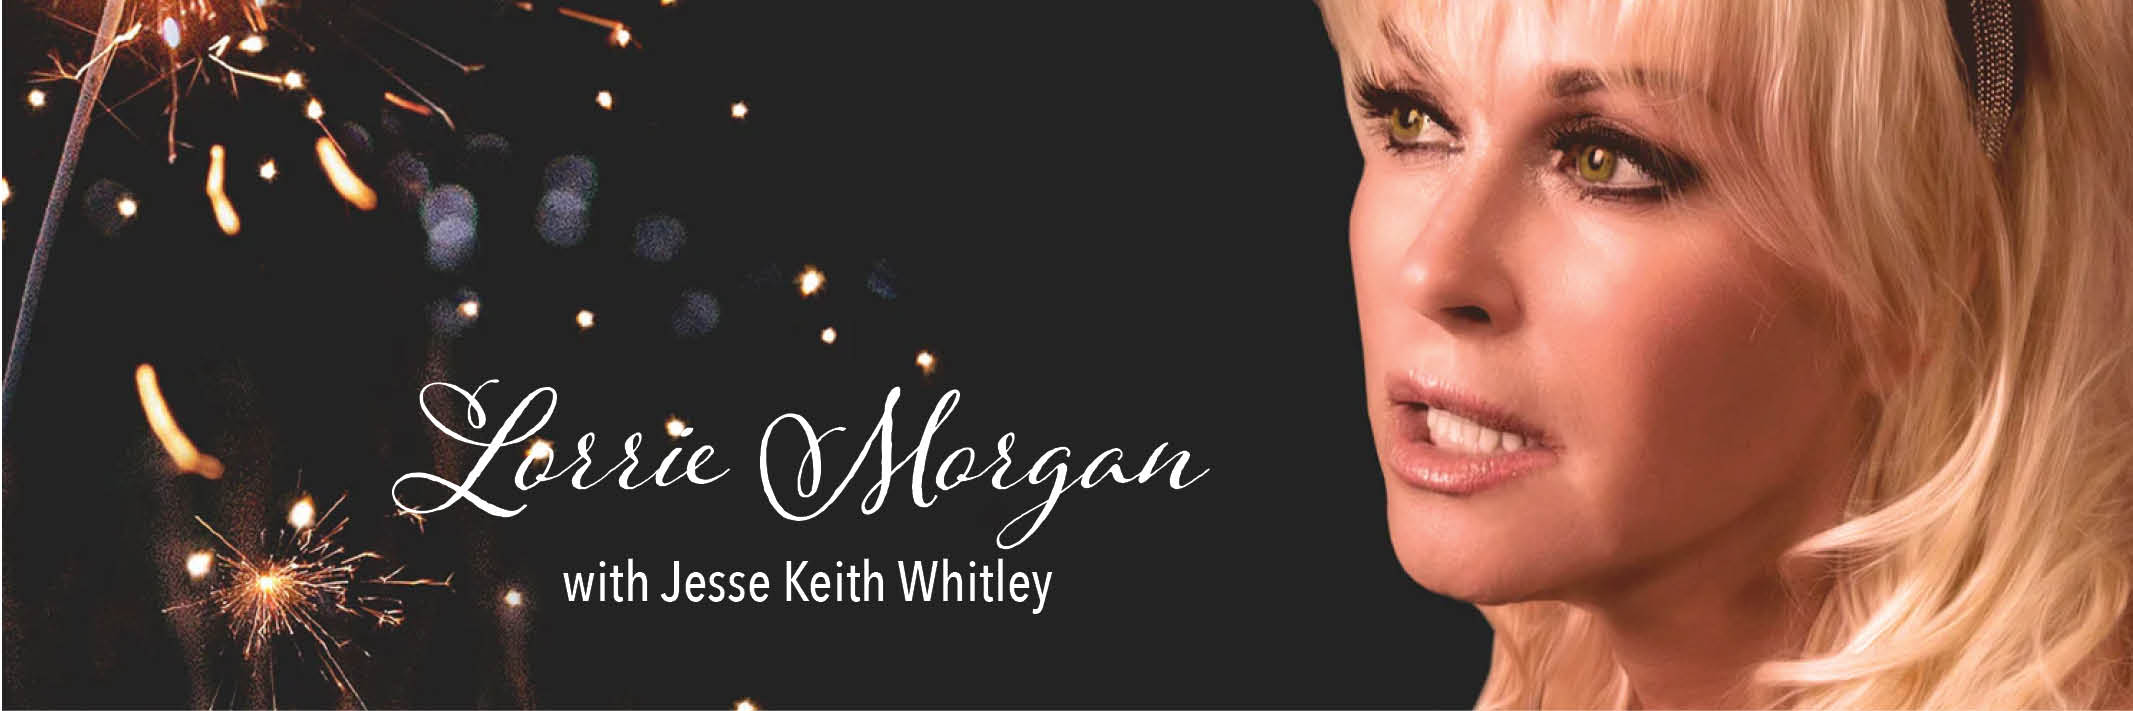 Lorrie Morgan with Jesse Keith Whitley